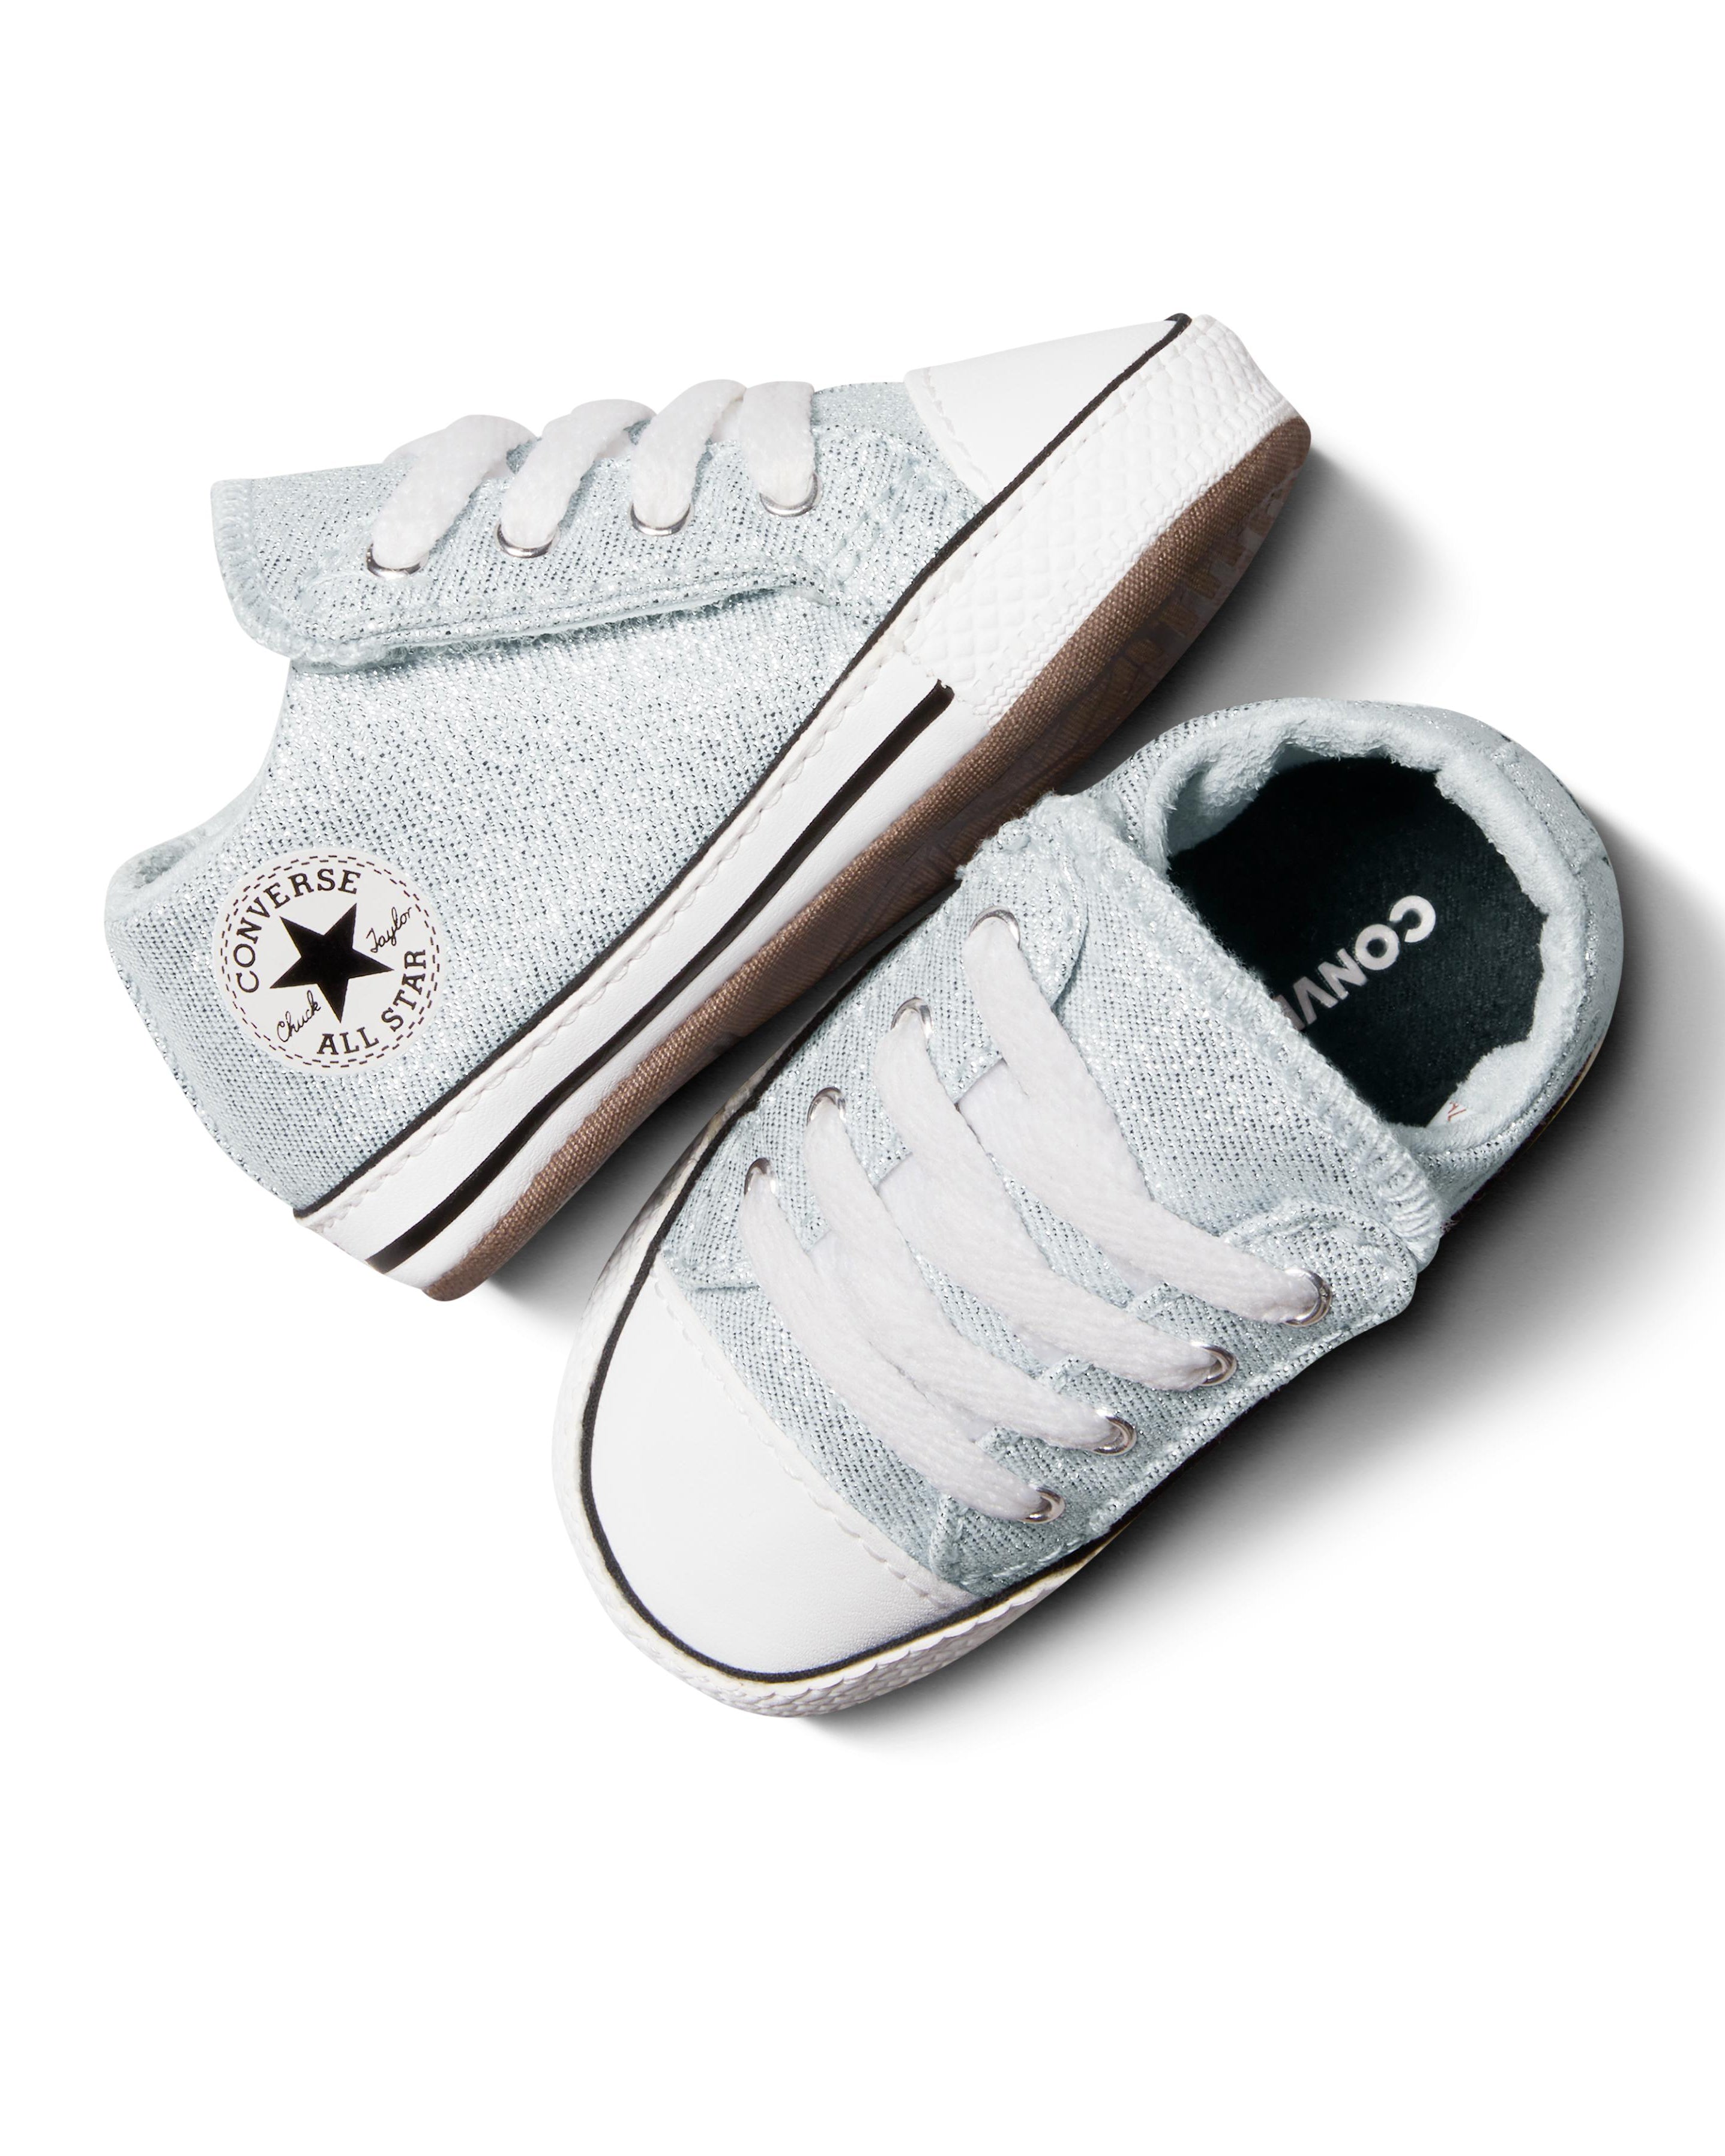 Converse Chuck Taylor Canvas Cribster Infants - Ghosted/Natural Ivory/White